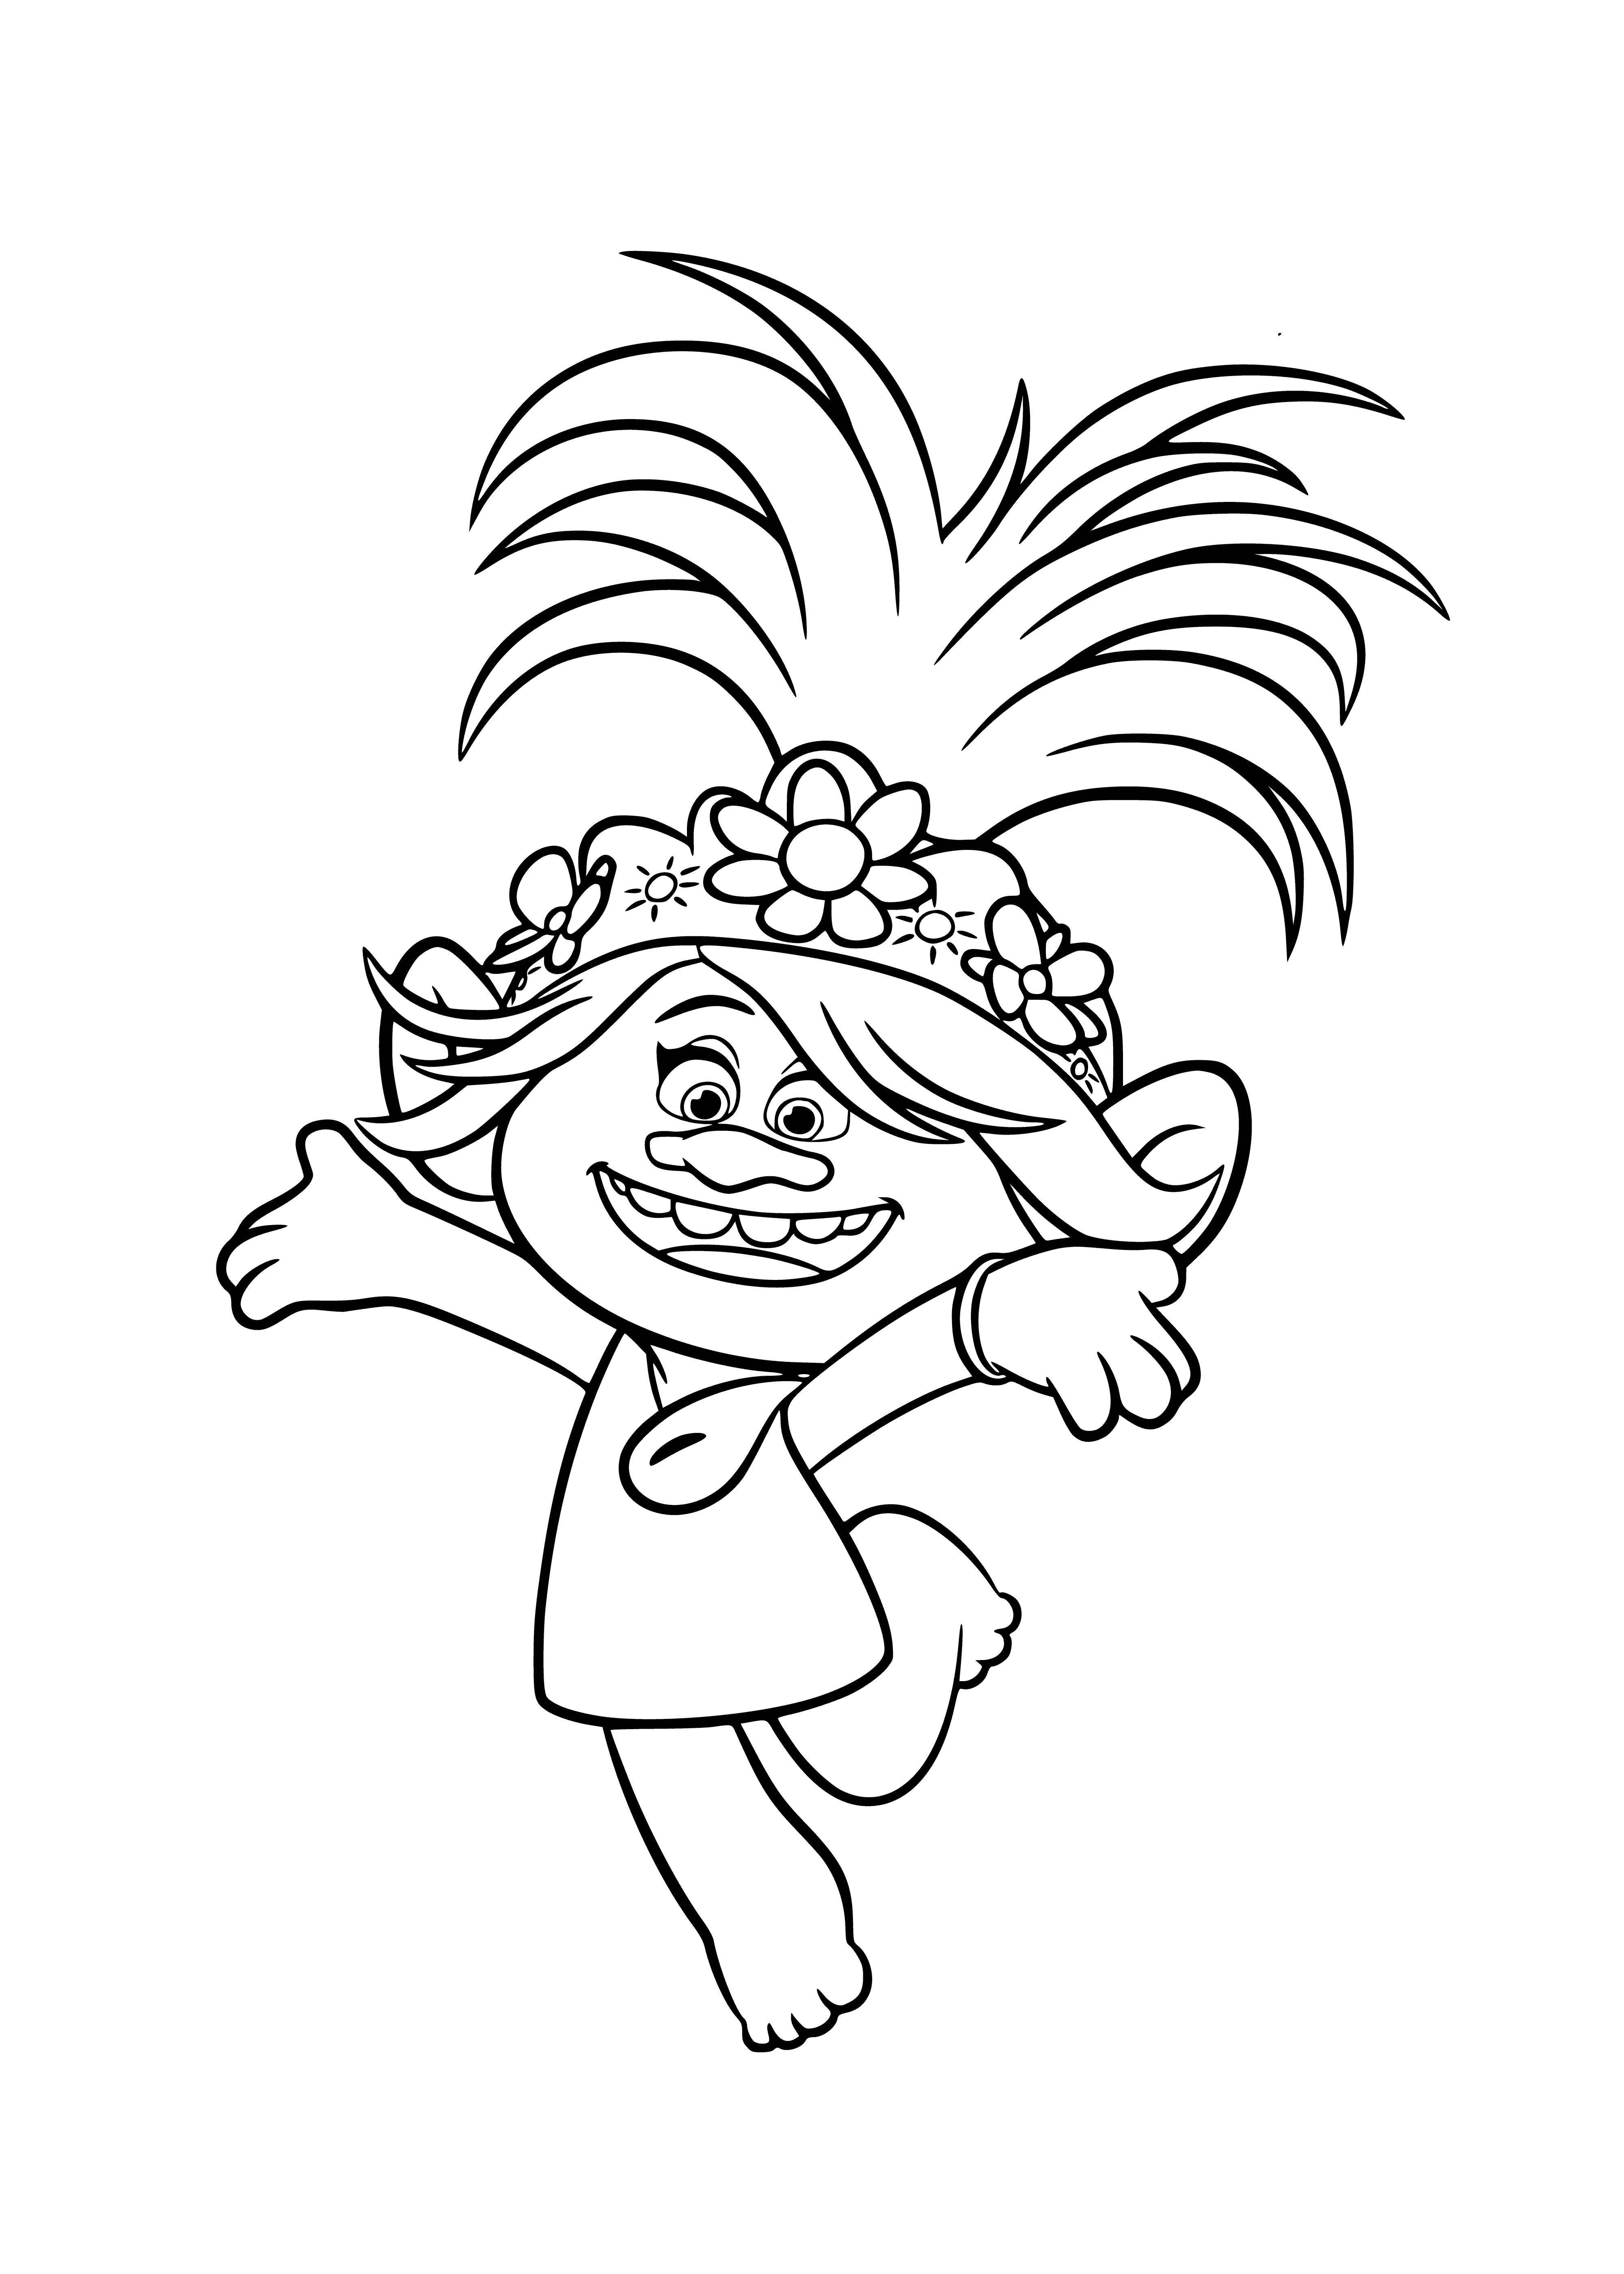 Cheerful Rosette coloring page